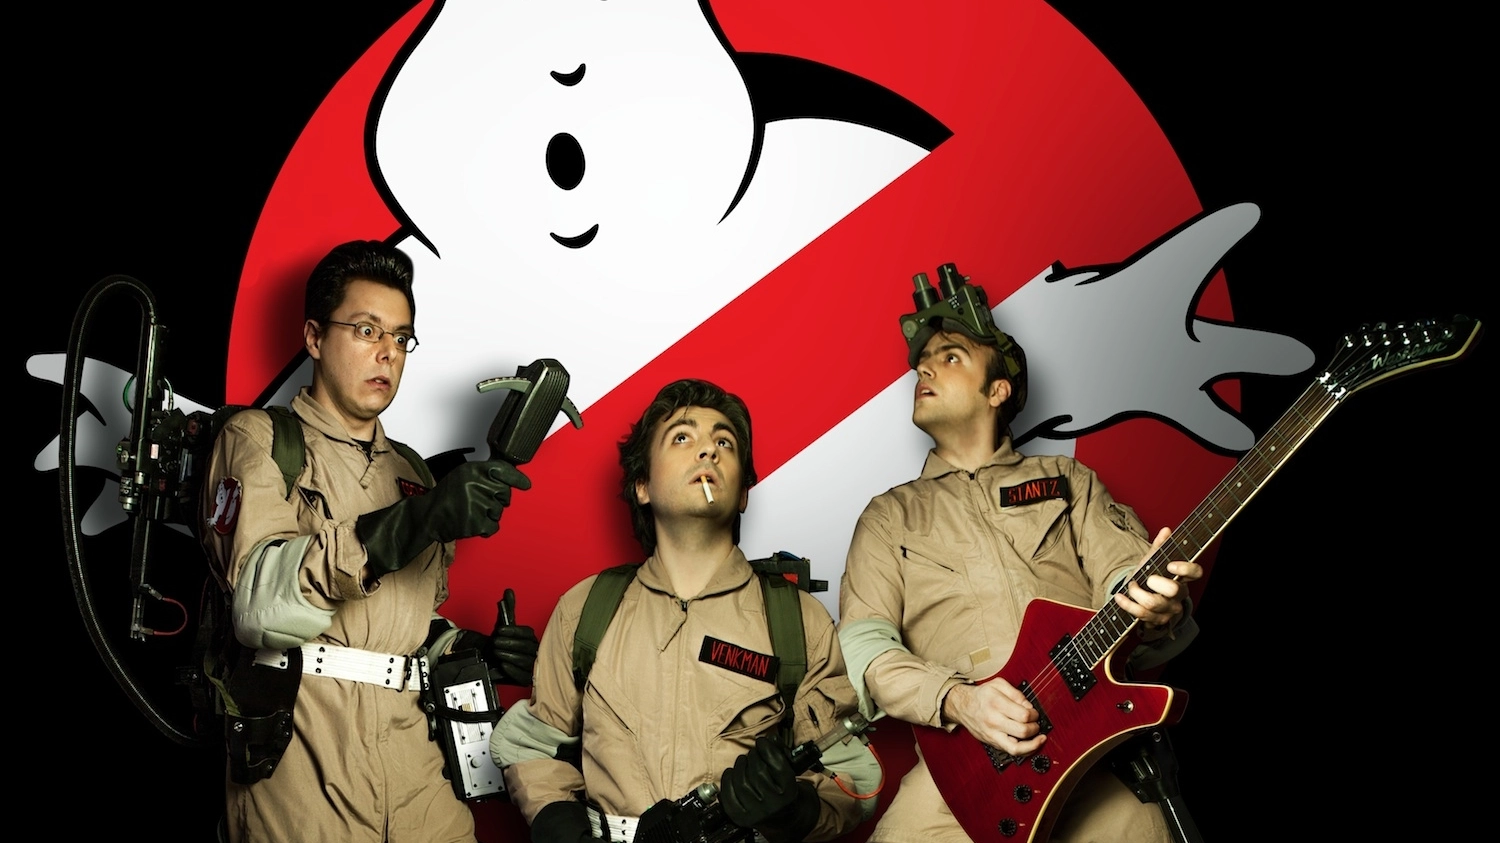 Ghostbusters arriva a teatro in versione musical